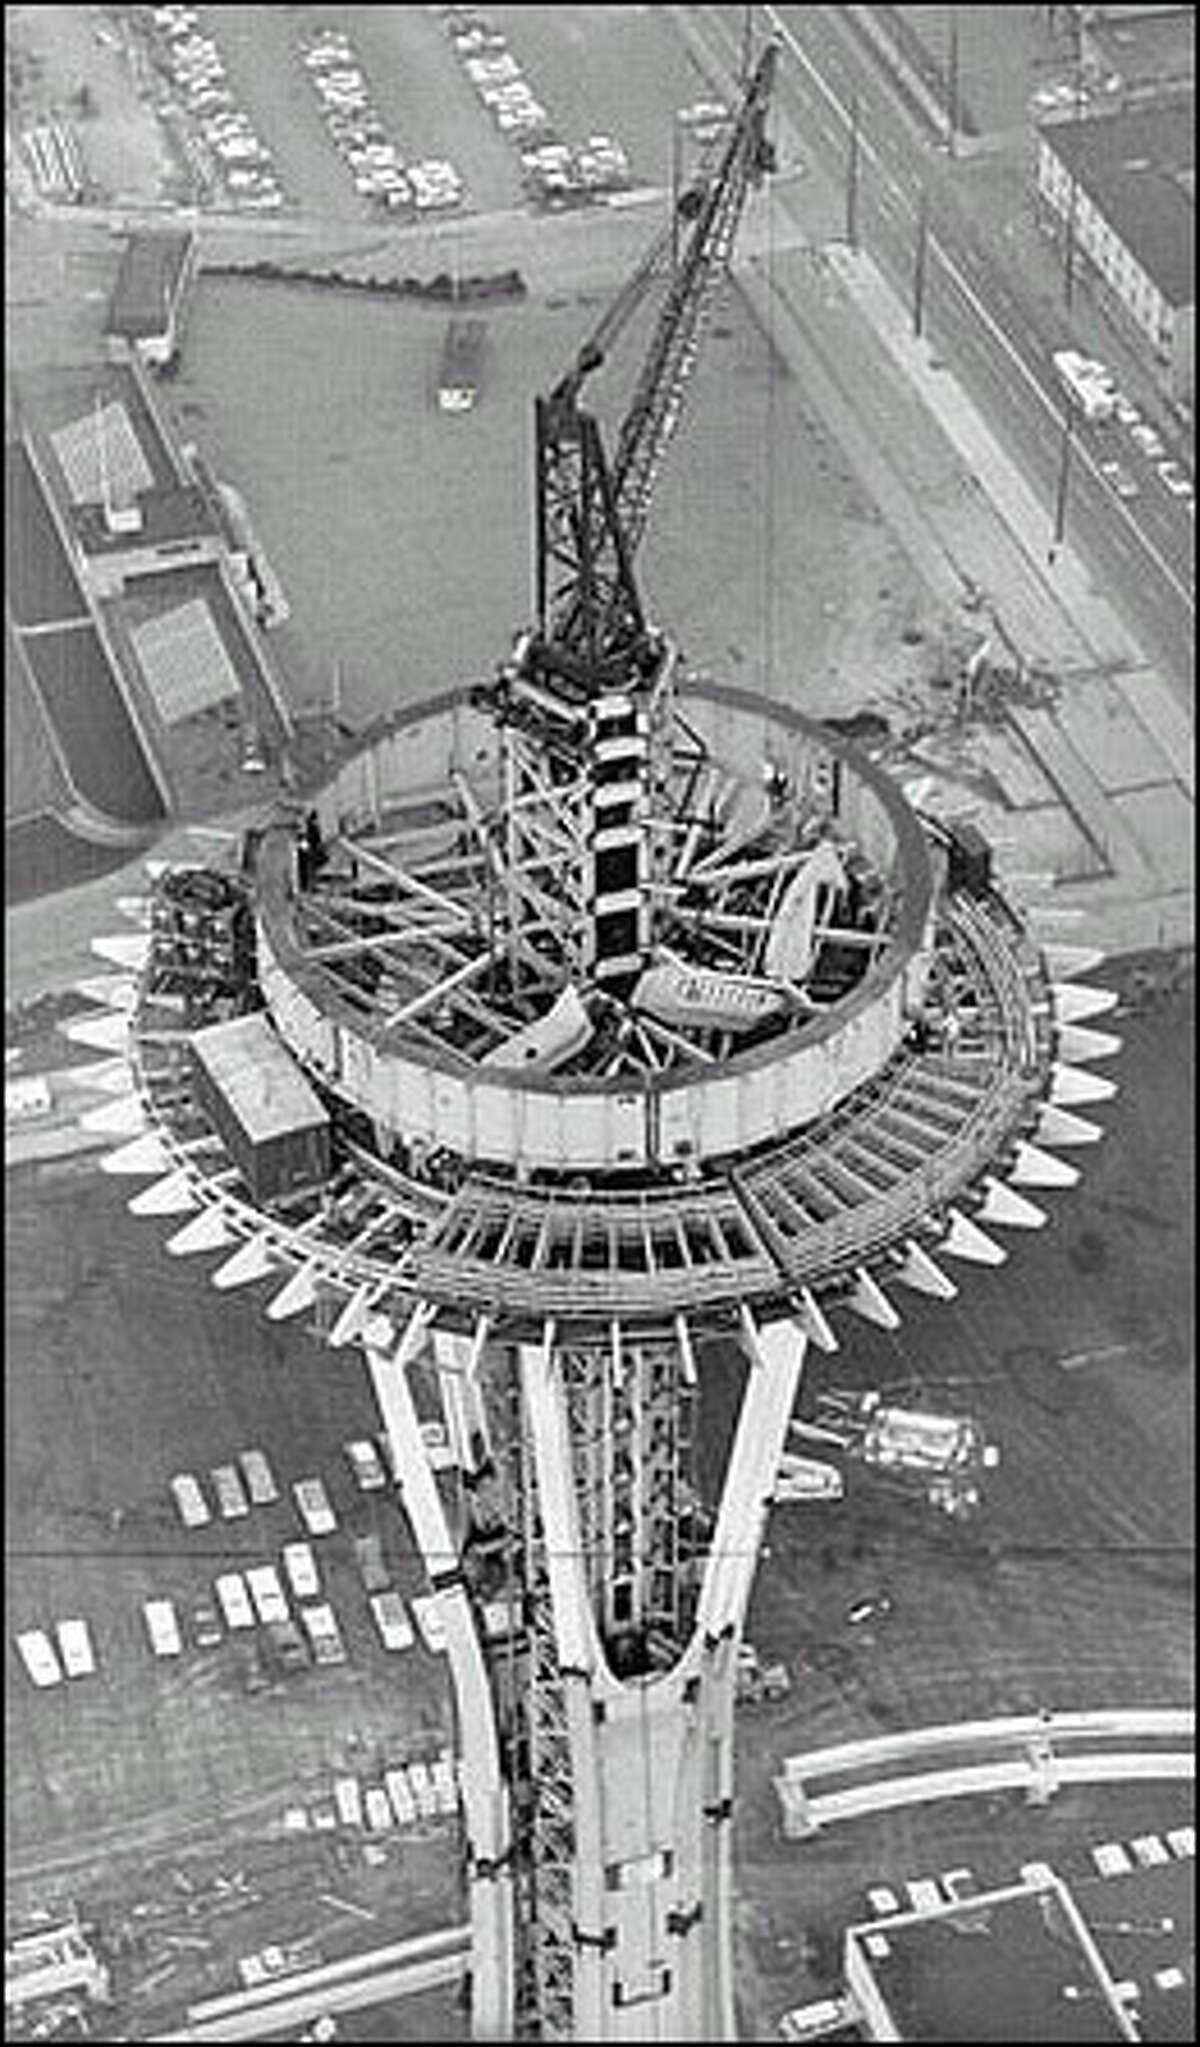 Original caption: "This unusual view of the World's Fair Space Needle was shot by Post-Intelligencer photographer John Vallentyne from a Seattle Police helicopter piloted by Patrolman Gordon D. Grosvenor. Thick ring in center is ring girder to hold out-rigger brackets that will support observation platform. Lattice-like sections in foreground are sections of restaurant turntable which will make one revolution an hour. On ground (bottom of picture, right) are monorail beams on which trains will ride." Photo taken in 1961.